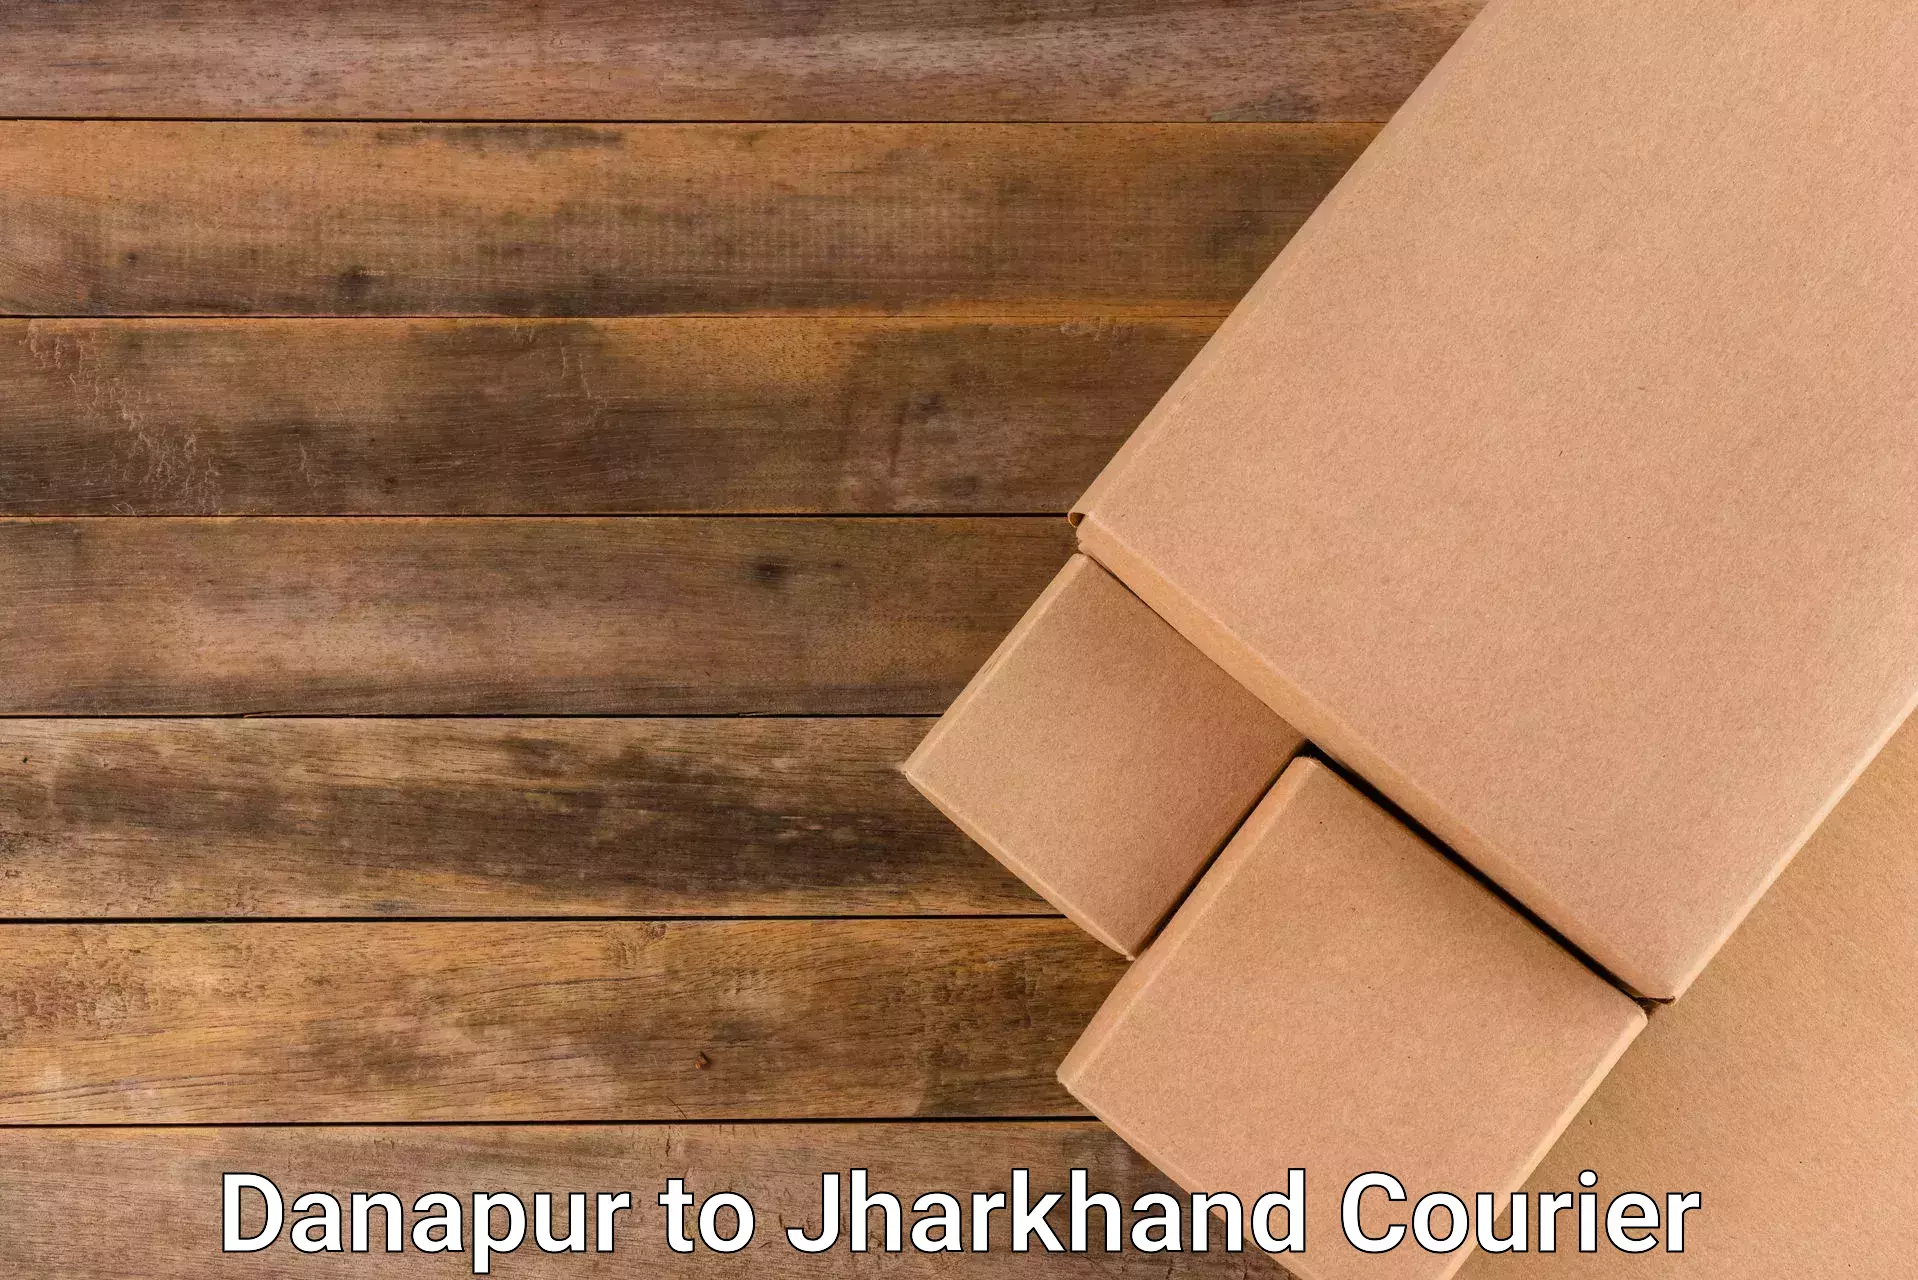 Business delivery service Danapur to Jharkhand